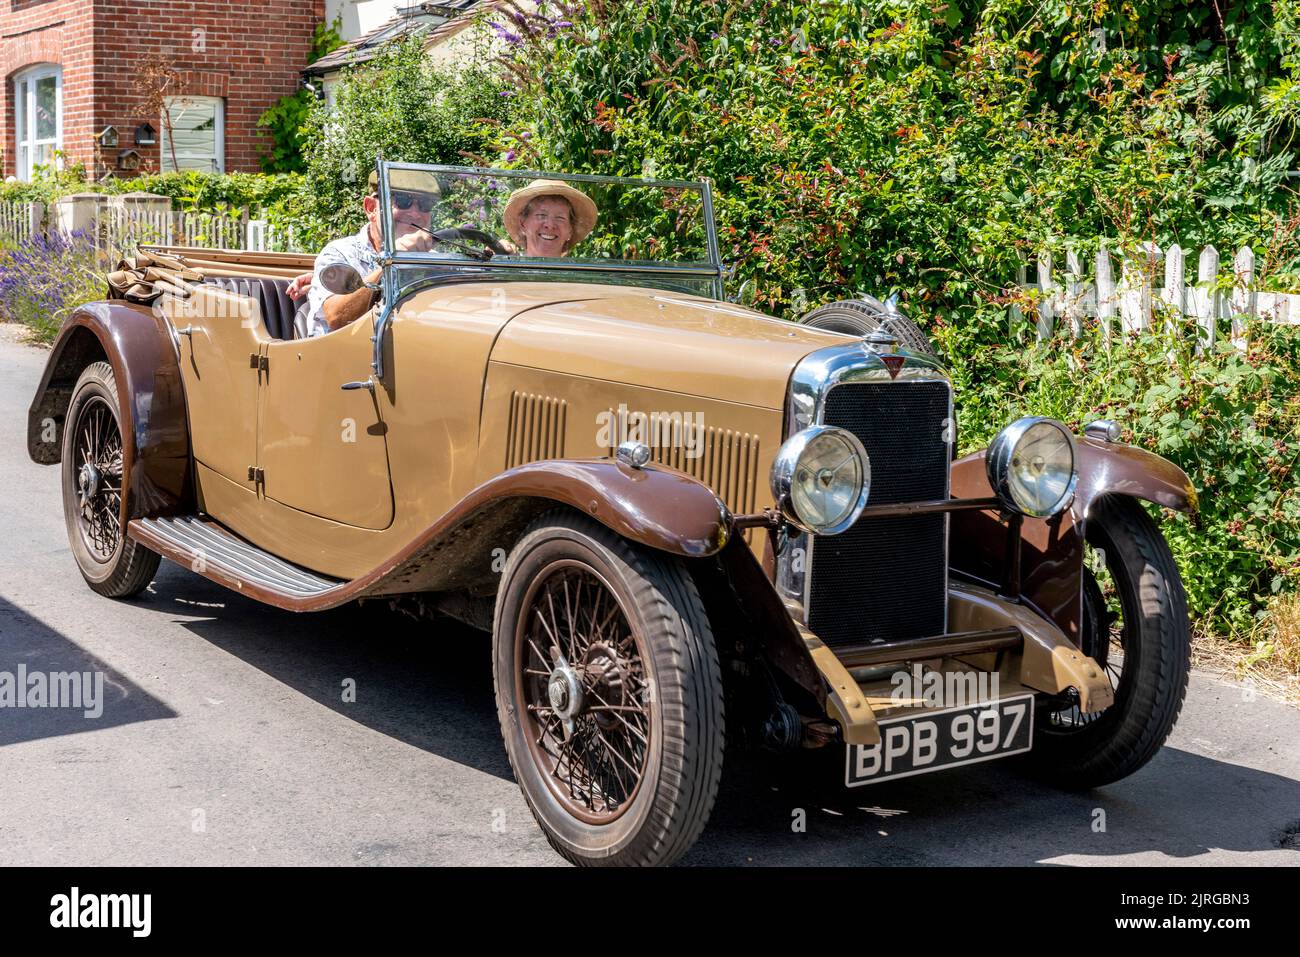 A Middle Aged Couple In A Vintage Car, Fairwarp Village, East Sussex, UK. Stock Photo